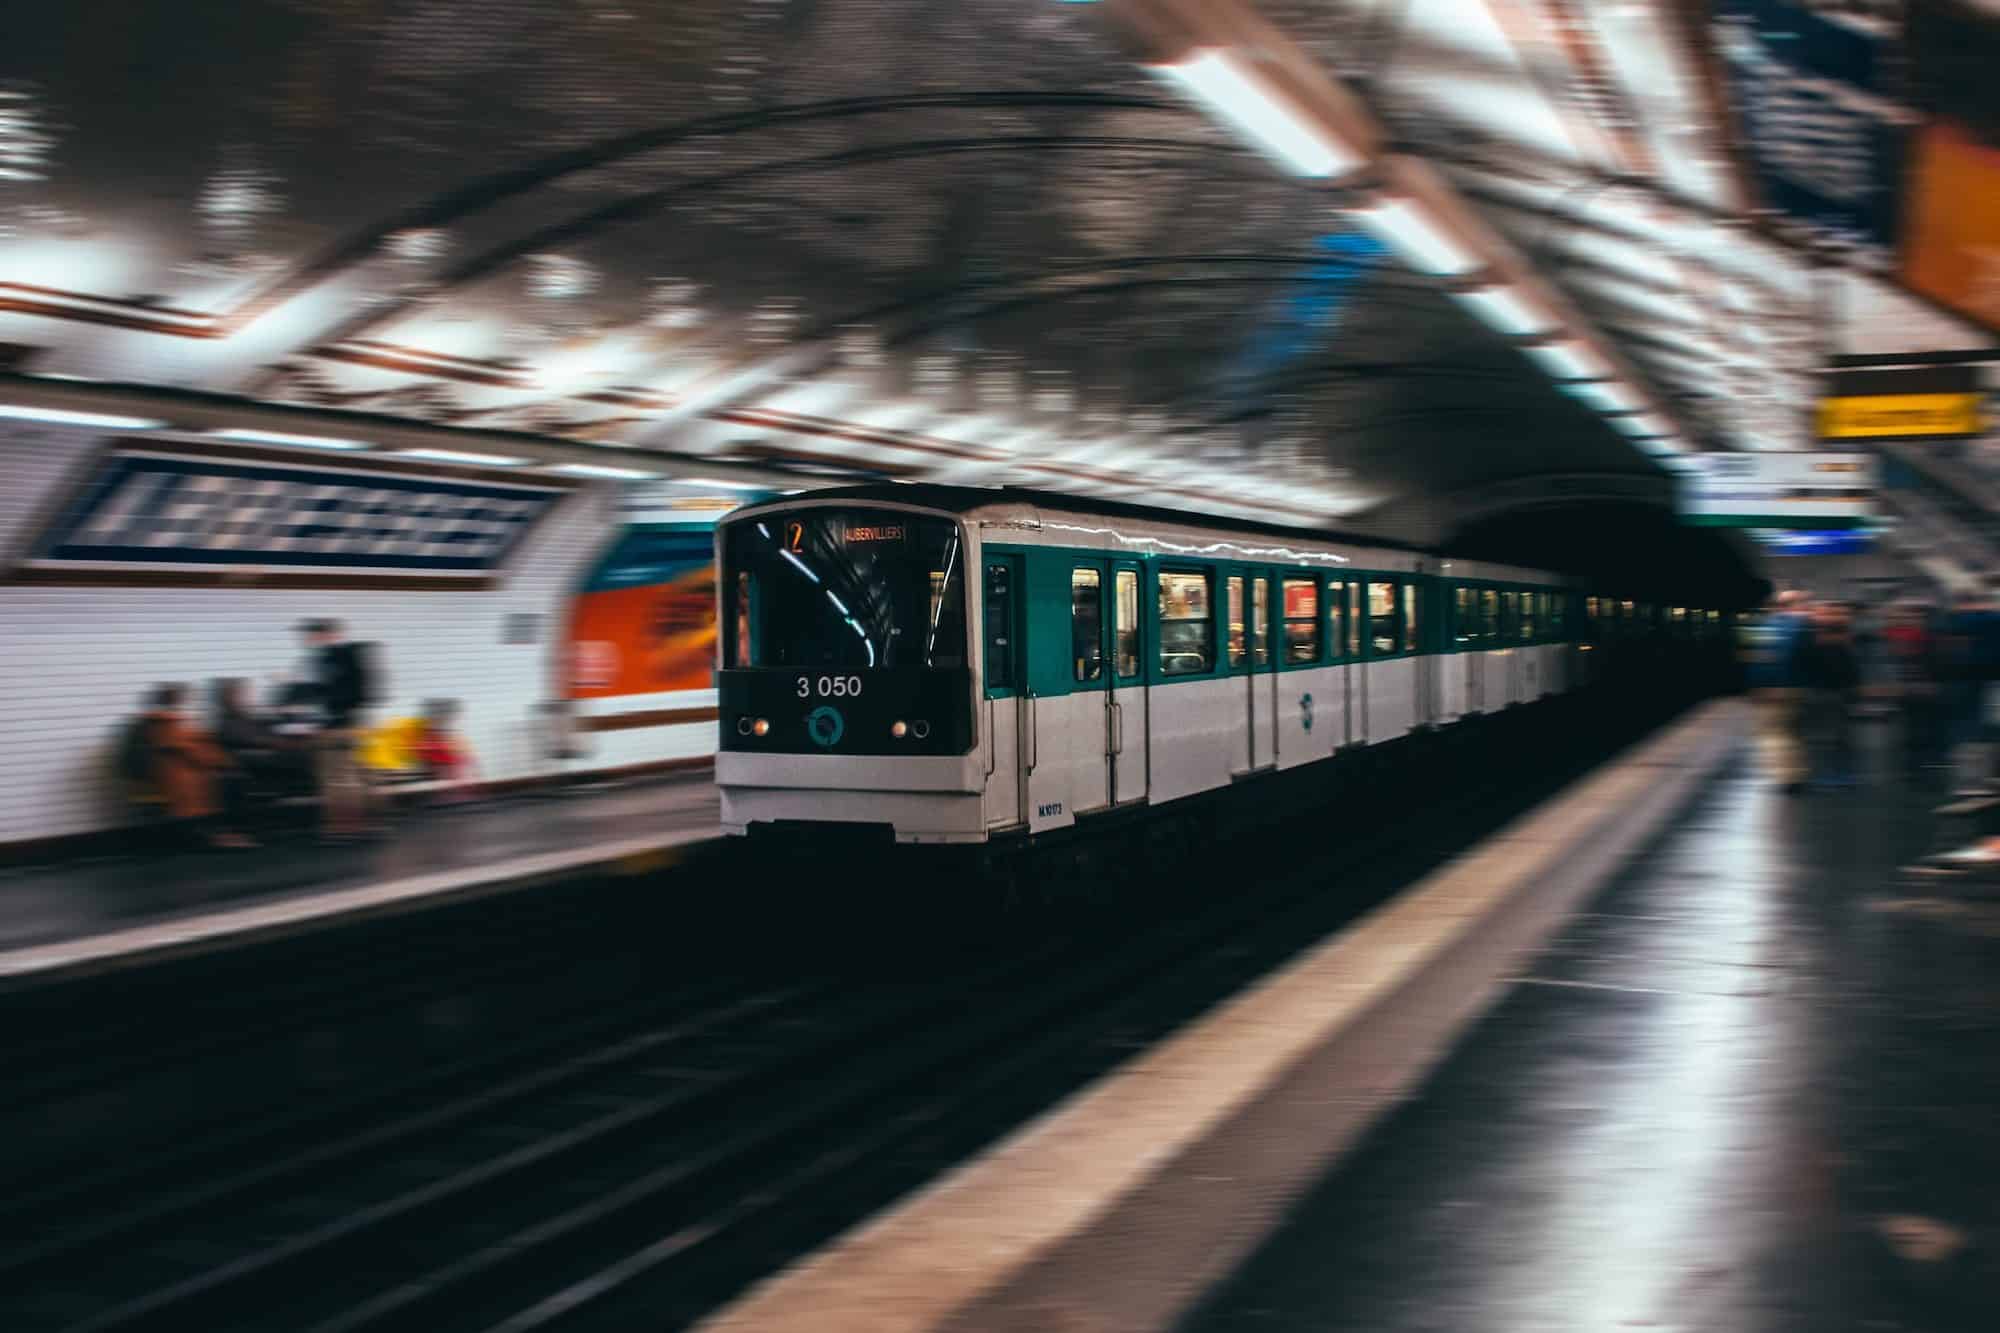 A metro train pulling in at Abbesses metro station. The train is the only thing in focus while the rest of the image is blurry.